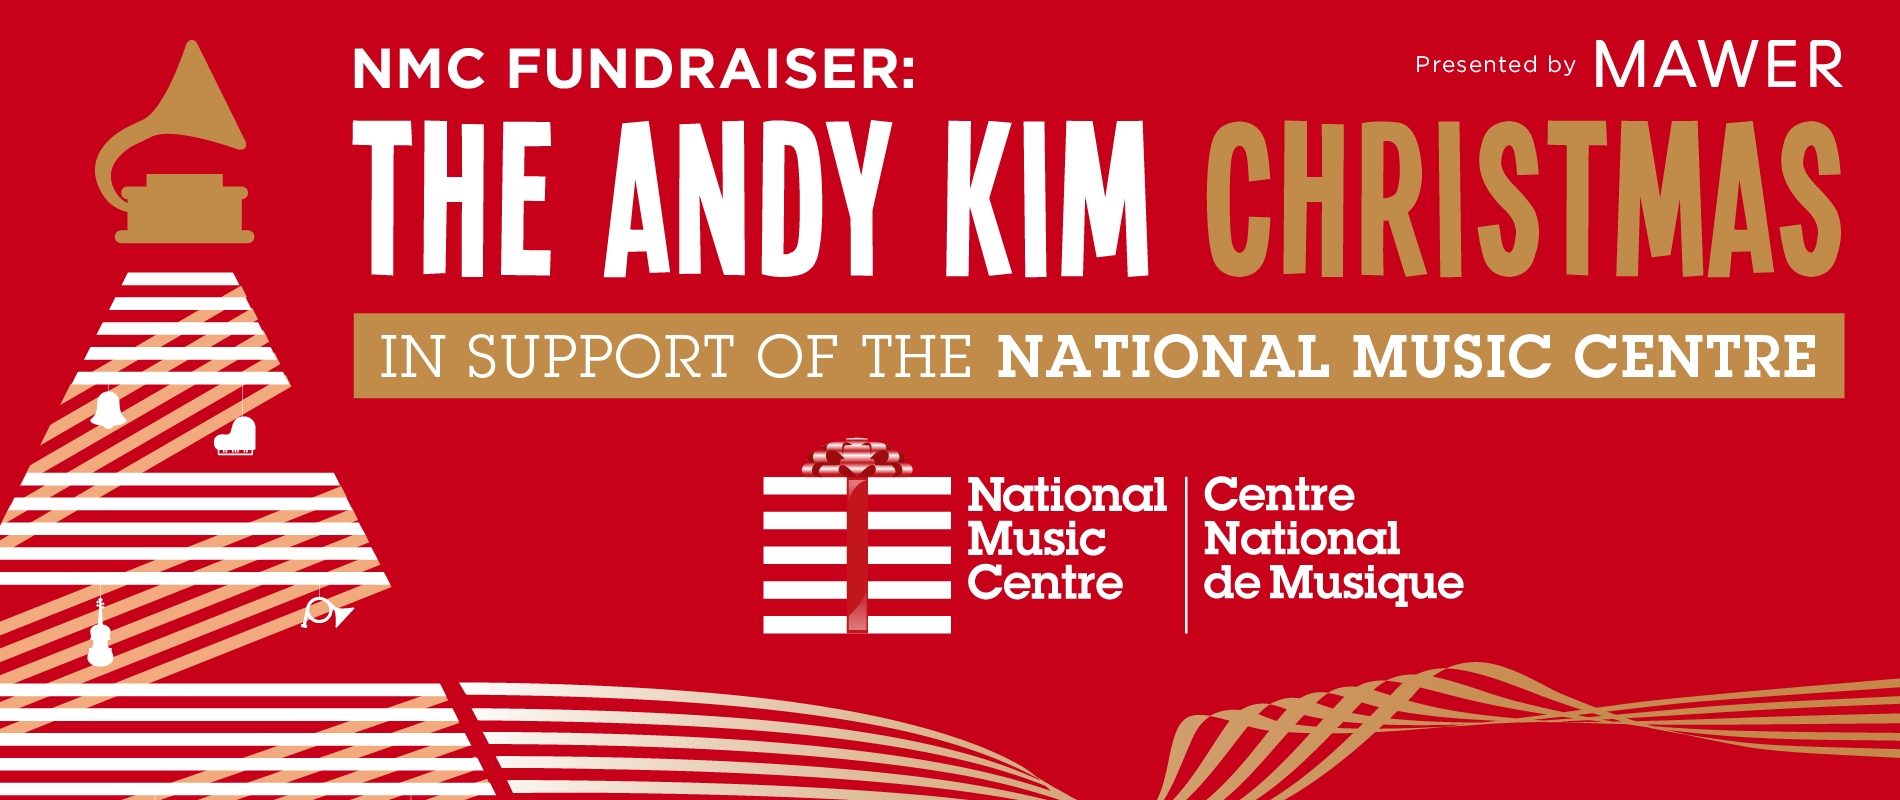 Rock Legend Randy Bachman and More Artists Added to The Andy Kim Christmas Lineup on December 15